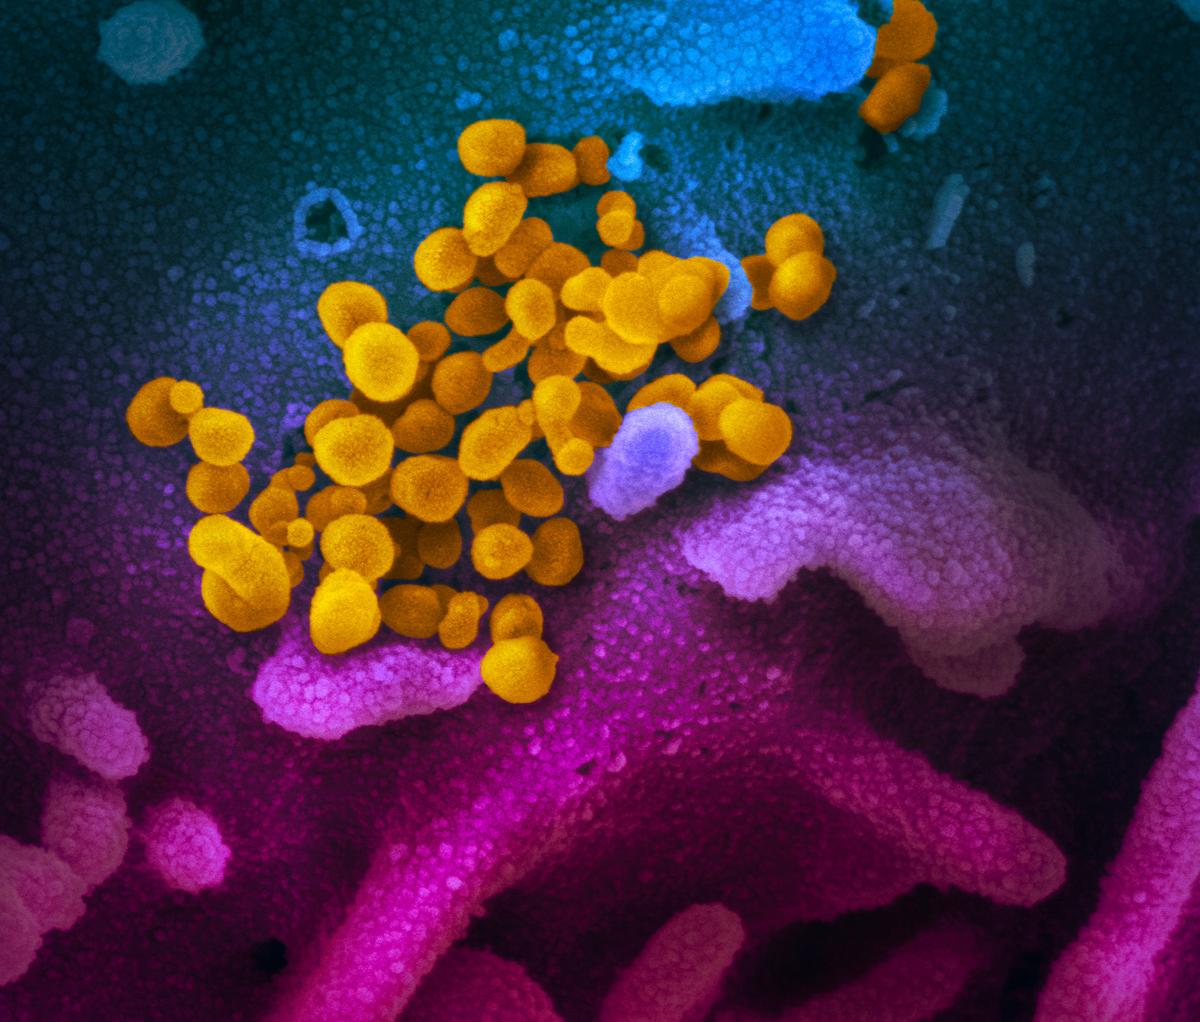 This scanning electron microscope image, published on Feb. 13, 2020, shows SARS-CoV-2 (yellow)—also known as 2019-nCoV, the virus that causes COVID-19—isolated from a patient in the United States, emerging from the surface of cells (blue/pink) cultured in the lab. (Courtesy of NIAID-RML)